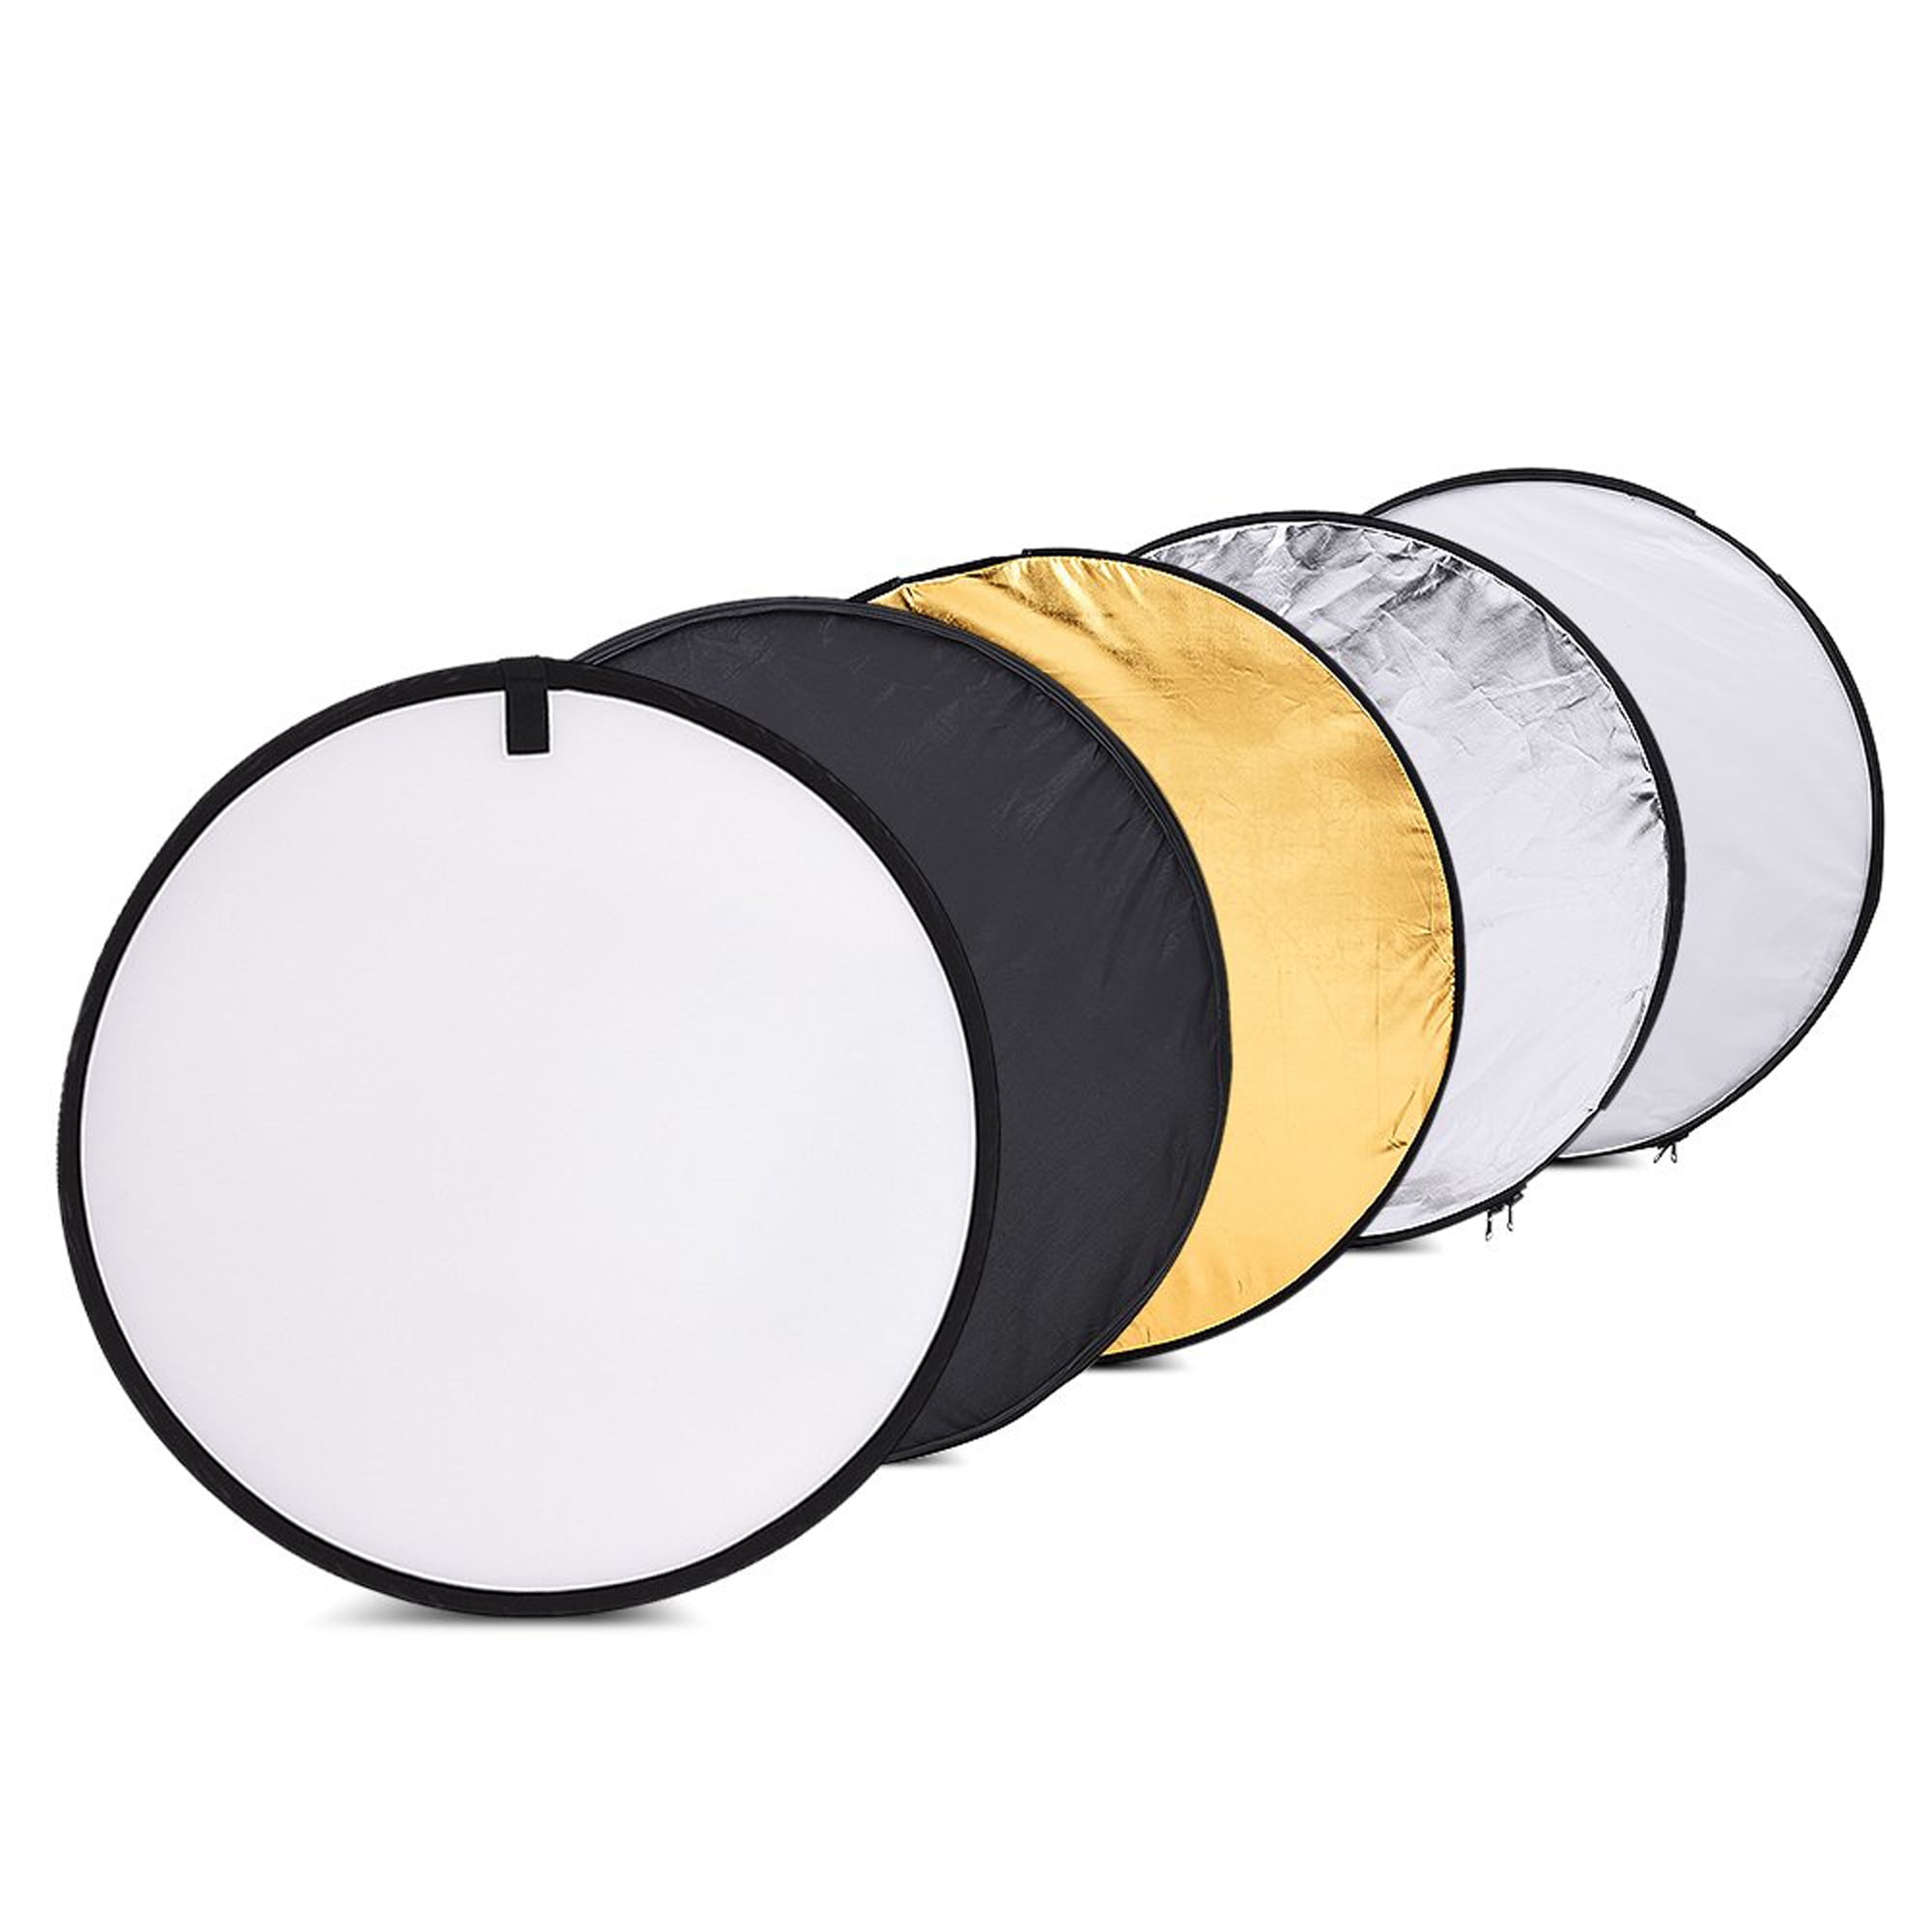 60cm 5in1 Multi Photo Disc Collapsible Light Reflector Photography Studio 